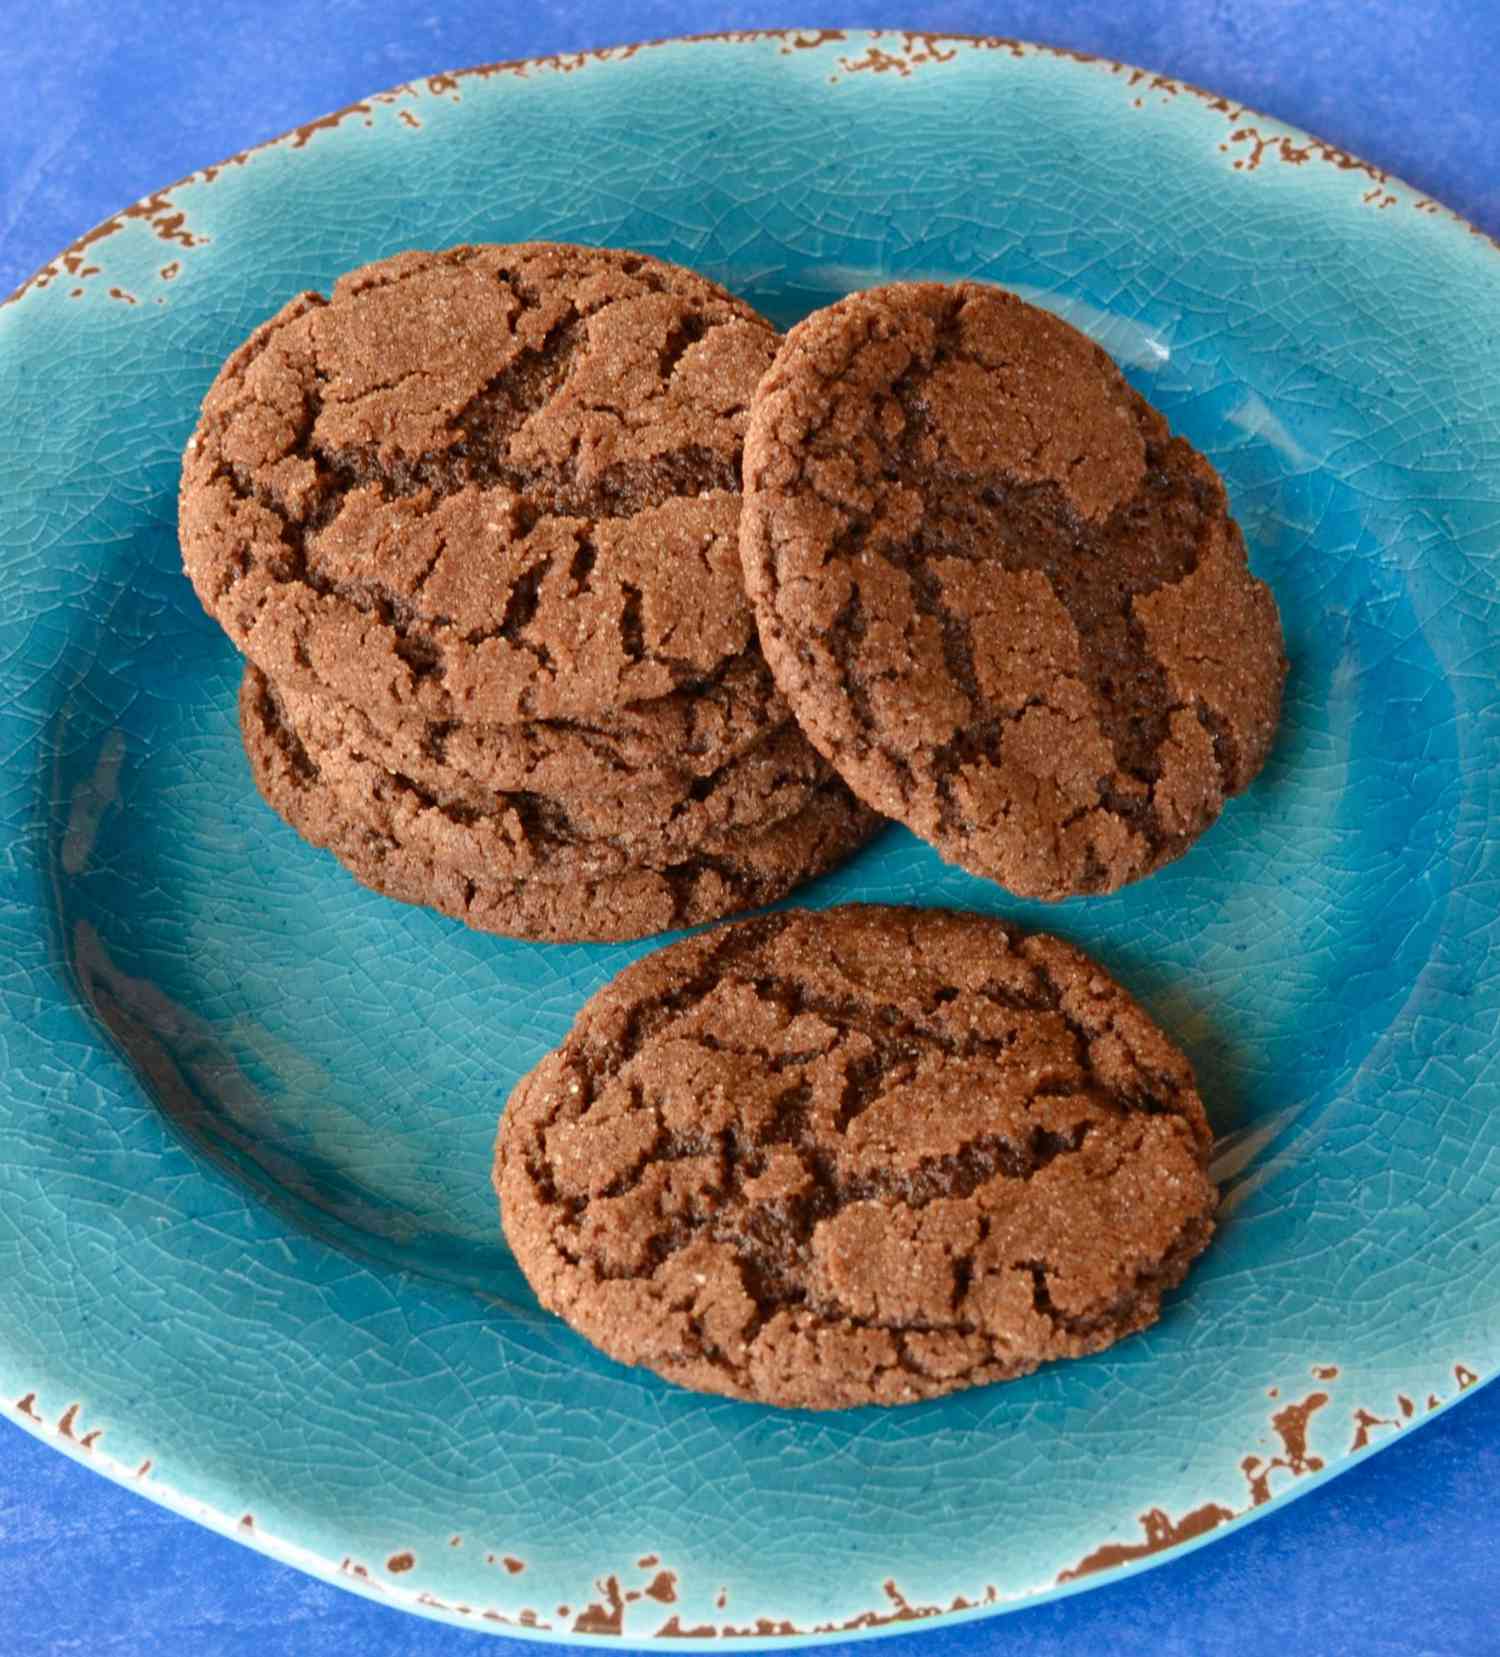 Chocolate Snickerdoodles on a blue plate